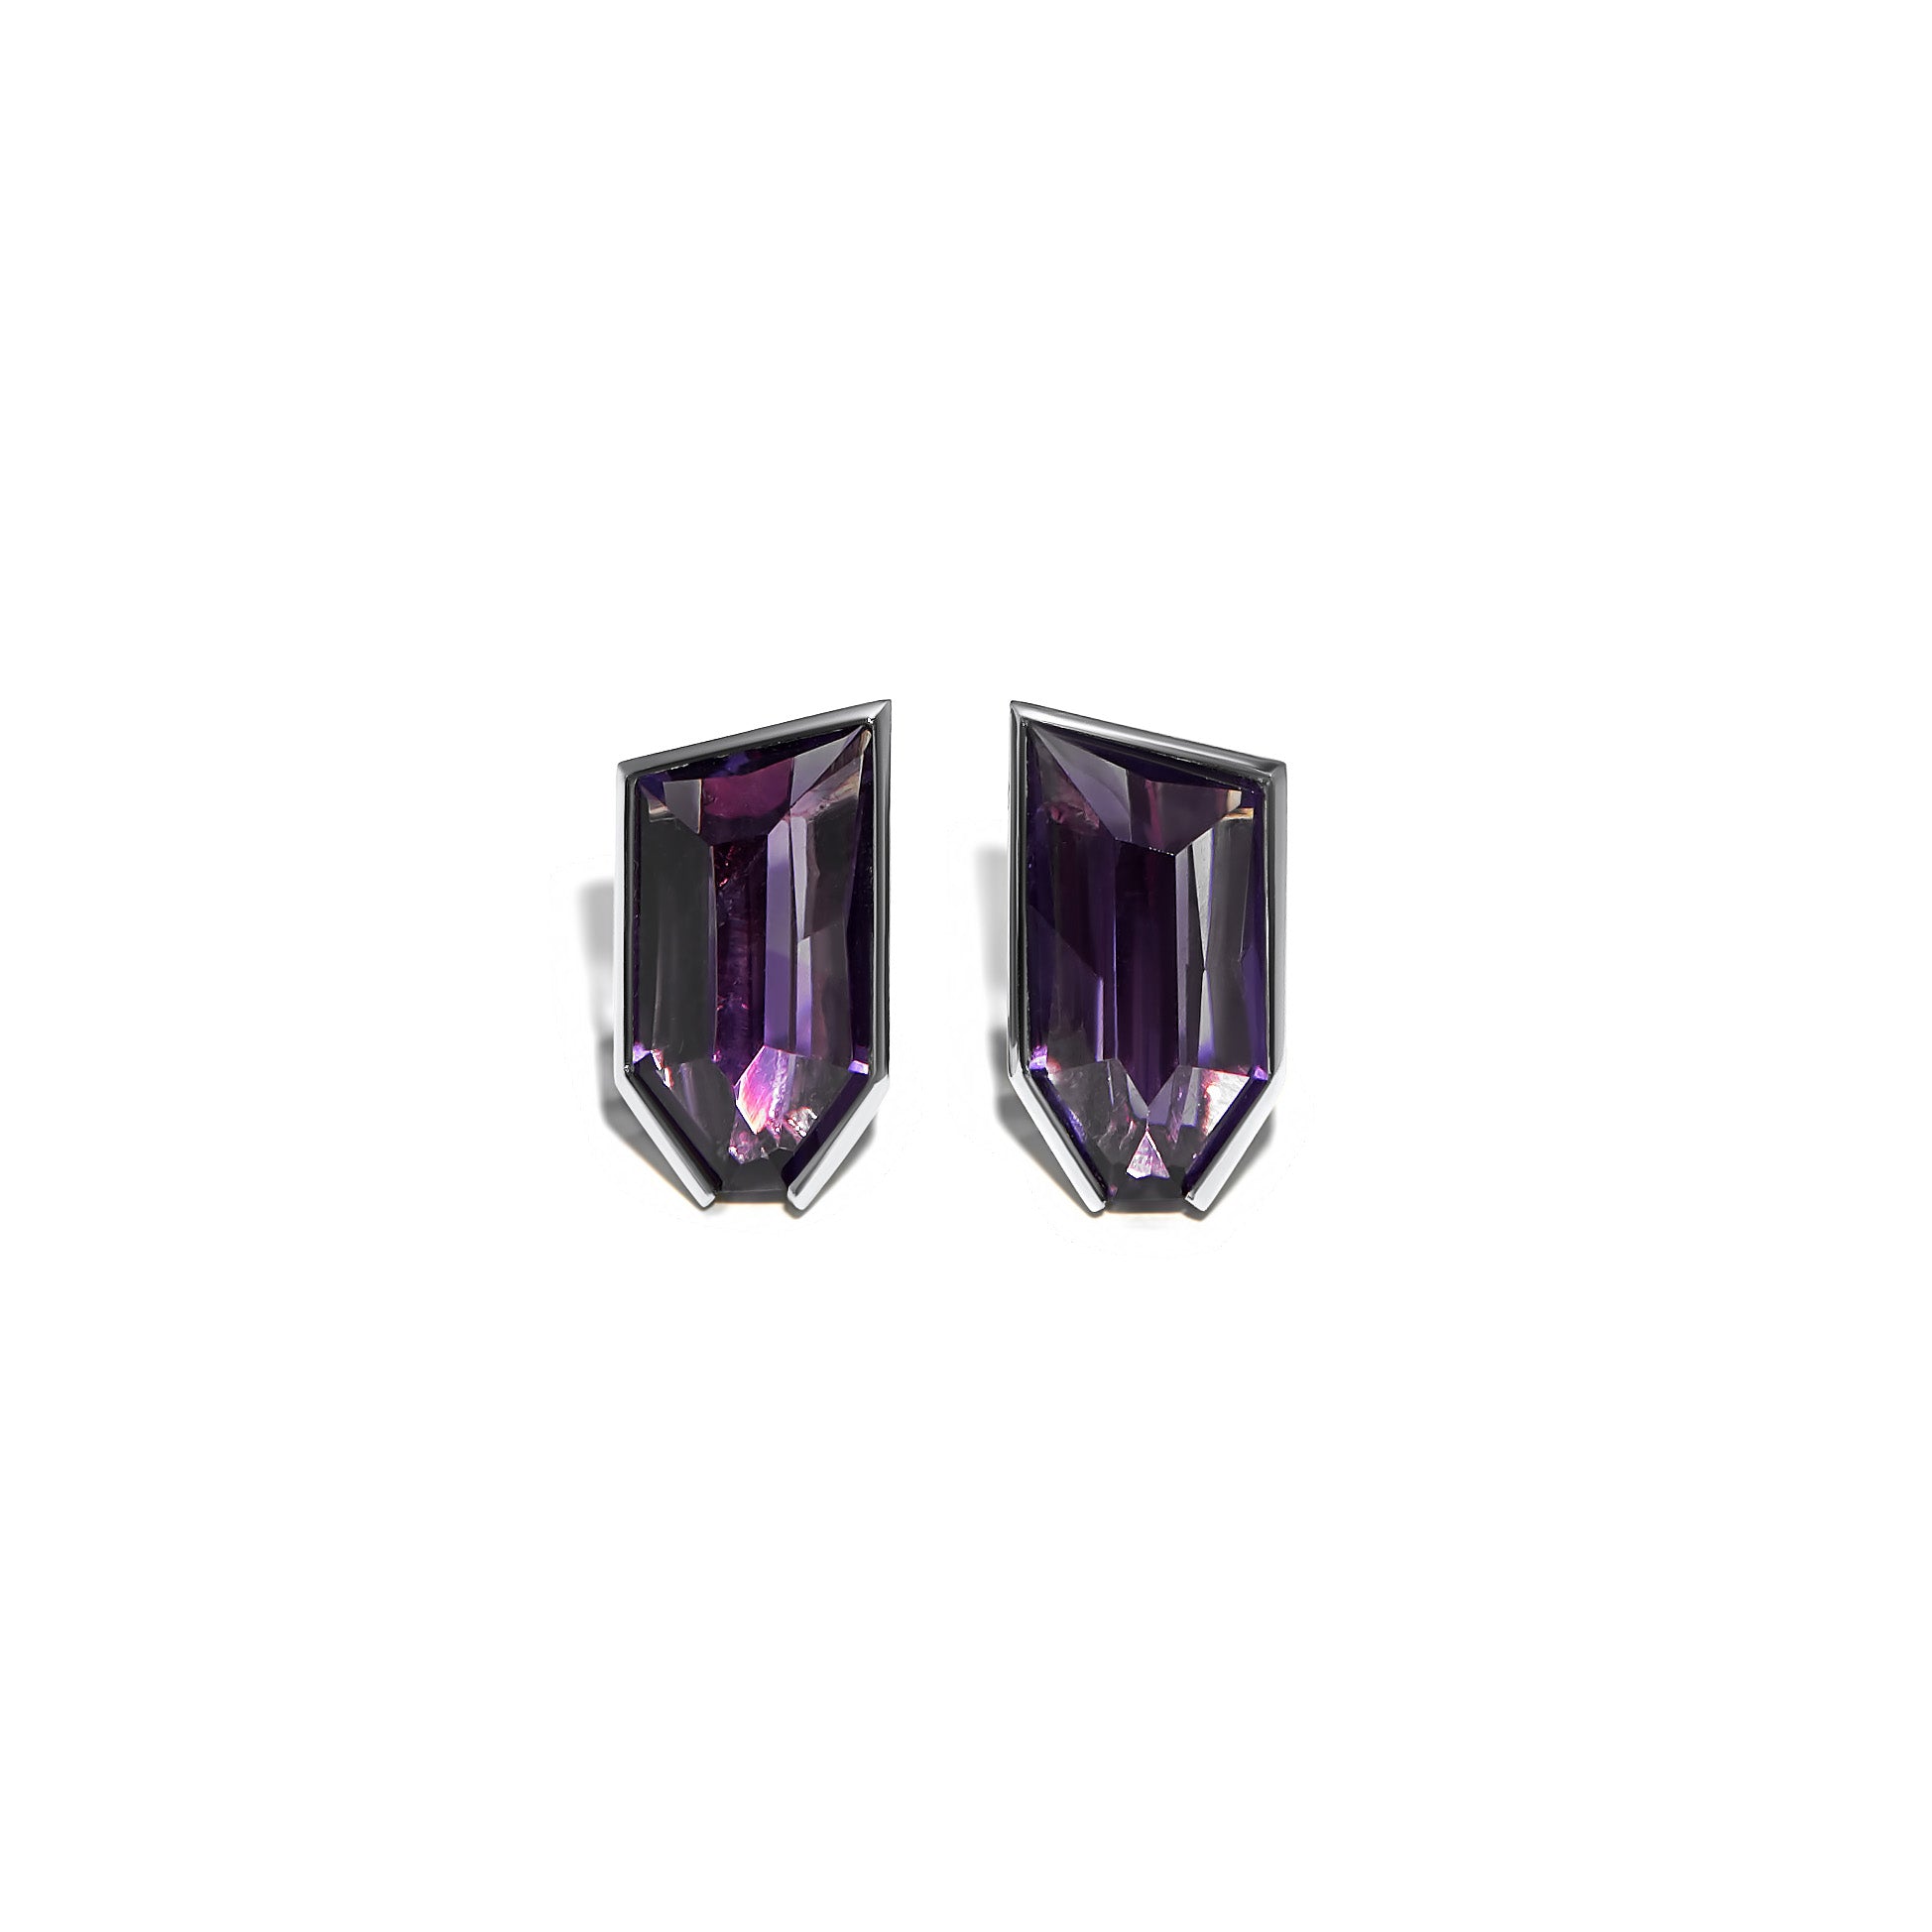 The centerpiece of these earrings is the two unique fancy-cut dark amethyst gemstones. The amethysts are carefully selected for their exceptional color and clarity, showcasing a deep, rich hue that is both captivating and enchanting. The fancy-cut shape adds a modern twist to the classic gemstone, creating a dynamic and eye-catching appeal.